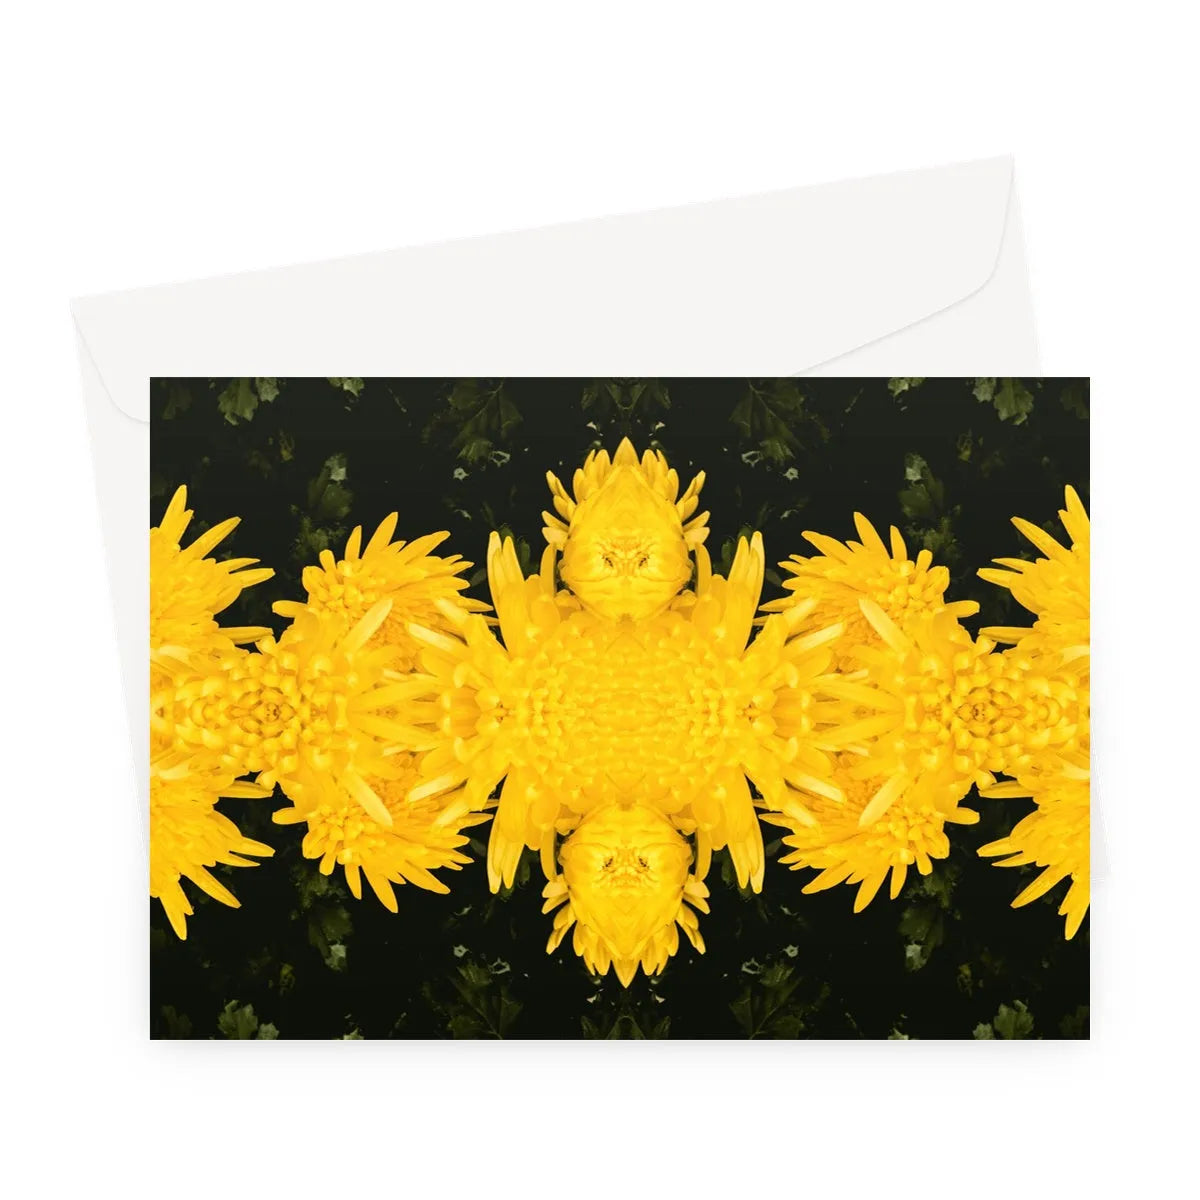 Tweedledum Greeting Card - A5 Landscape / 1 Card - Greeting & Note Cards - Aesthetic Art